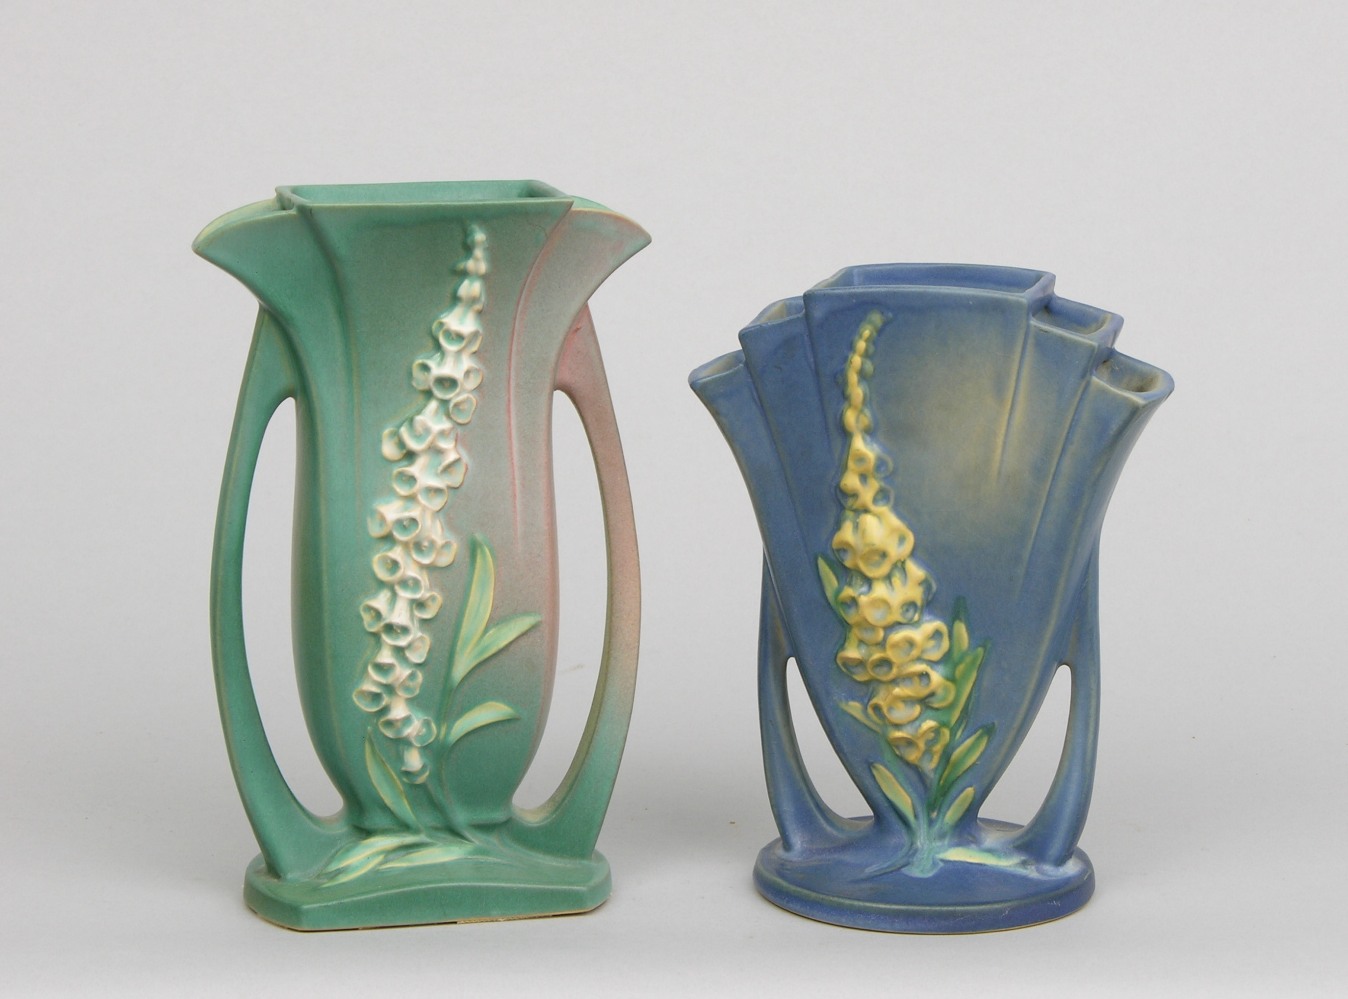 A Pair of Roseville Foxglove Vases, American, Mid 20th Century , 11.17.